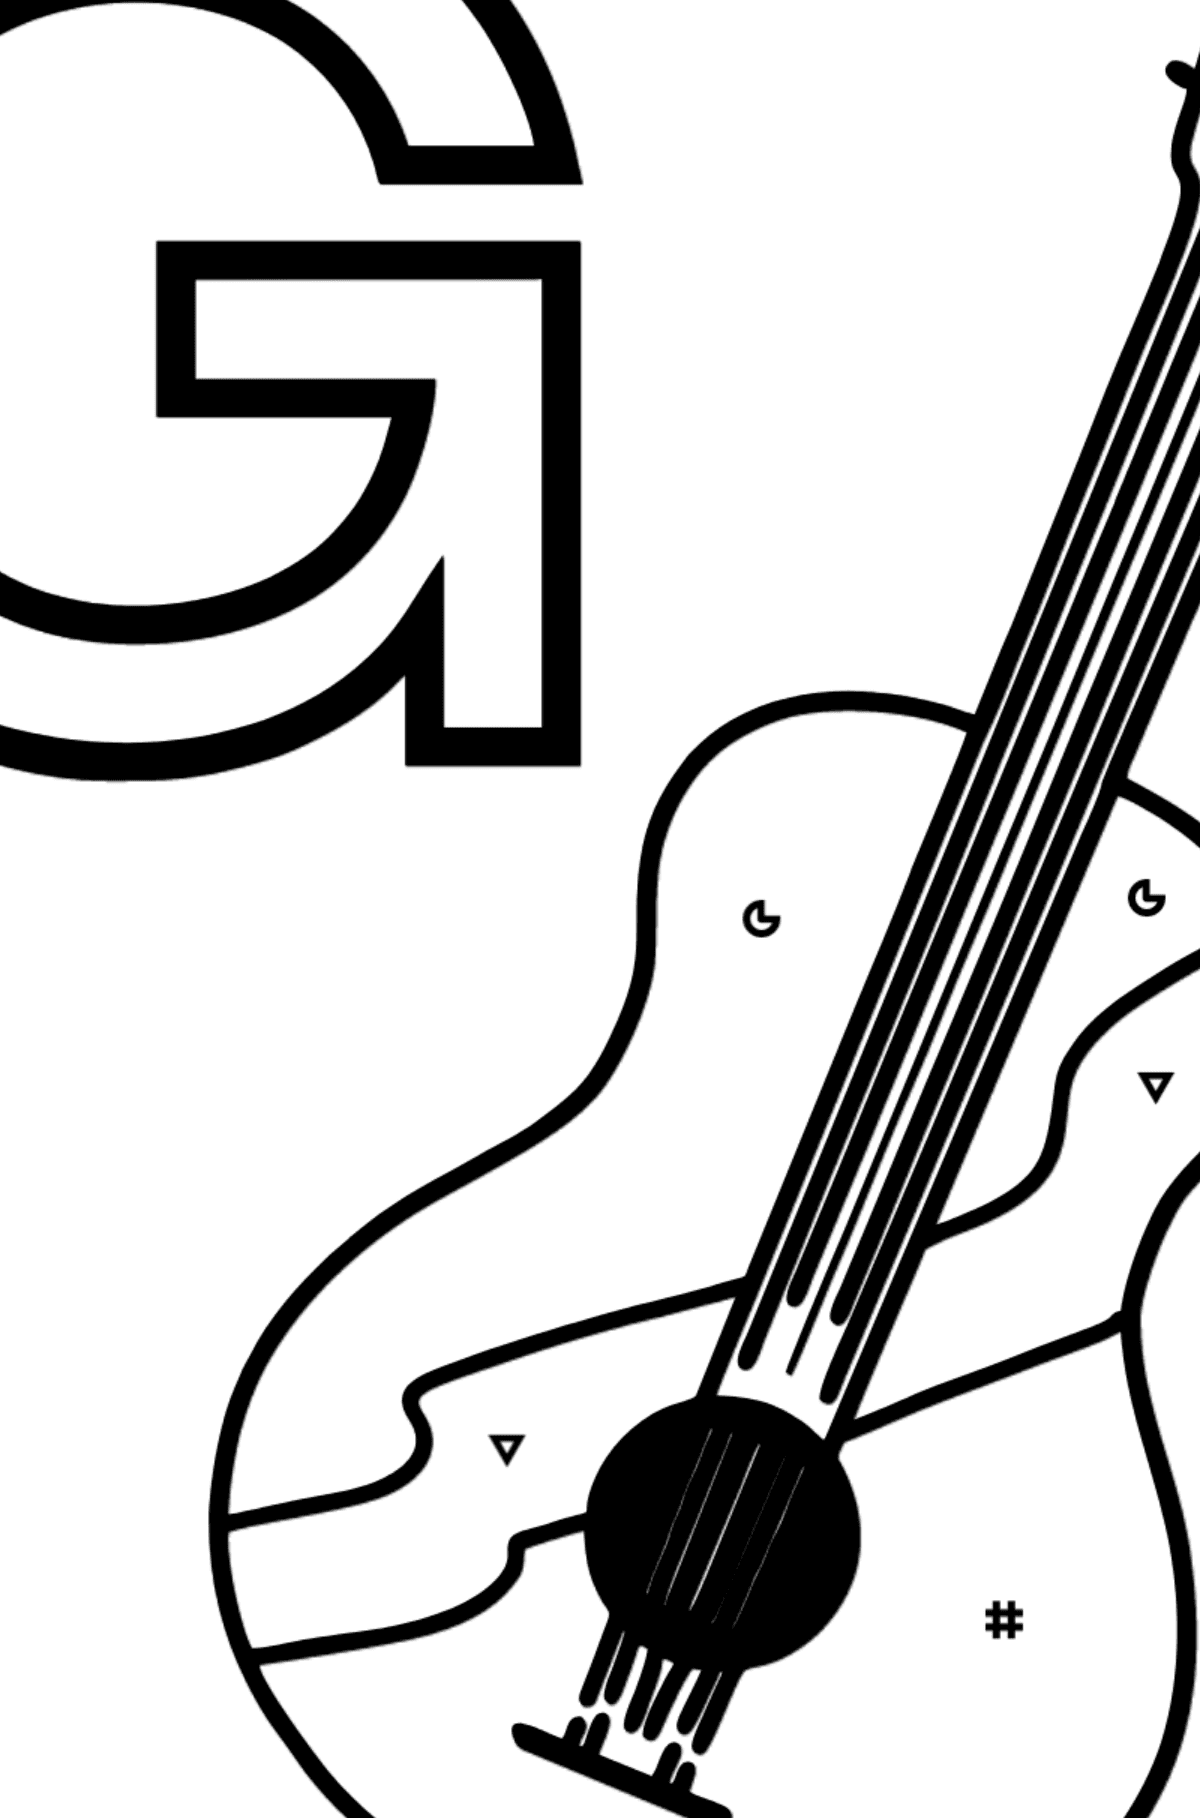 Spanish Letter G coloring pages - GUITARRA - Coloring by Symbols and Geometric Shapes for Kids